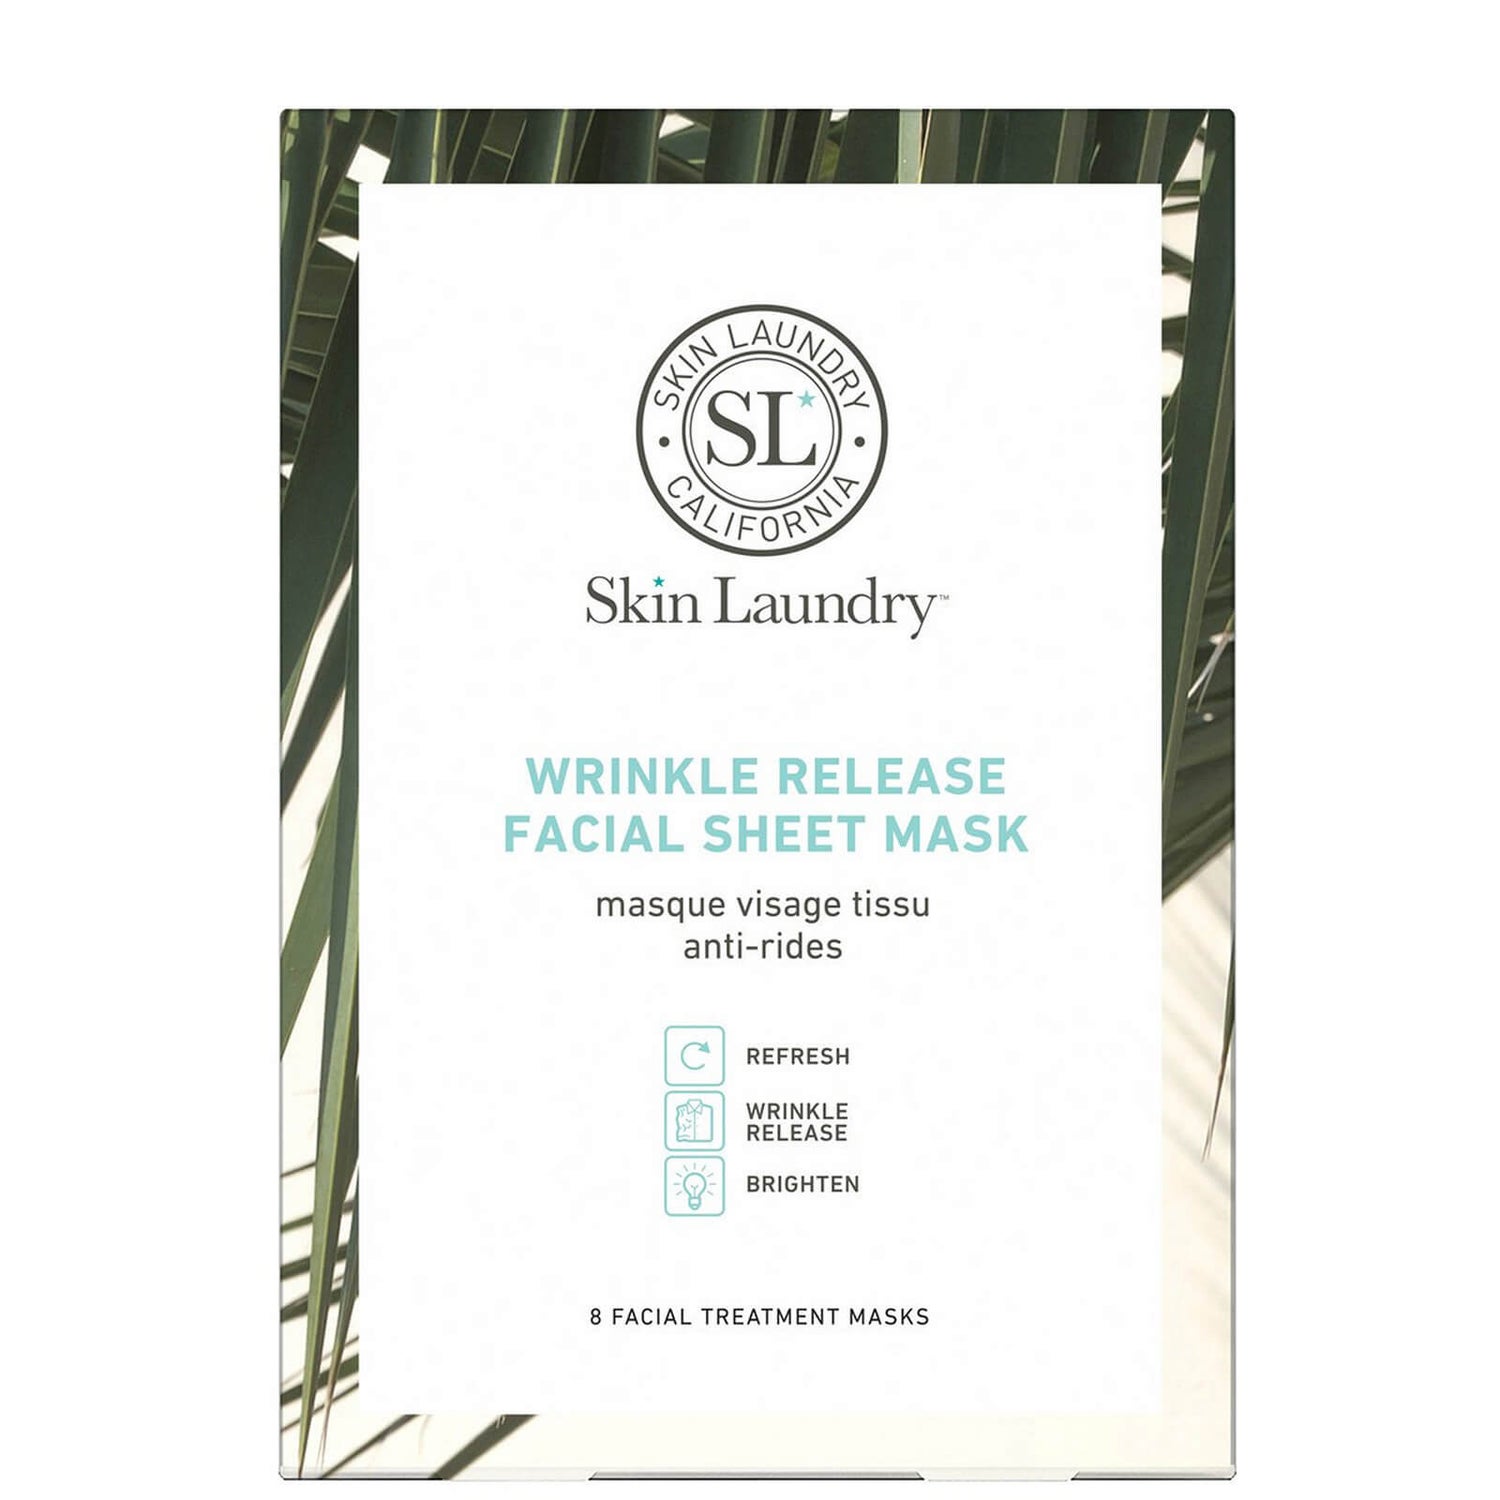 Skin Laundry Wrinkle Release Facial Sheet Mask (Pack of 8)